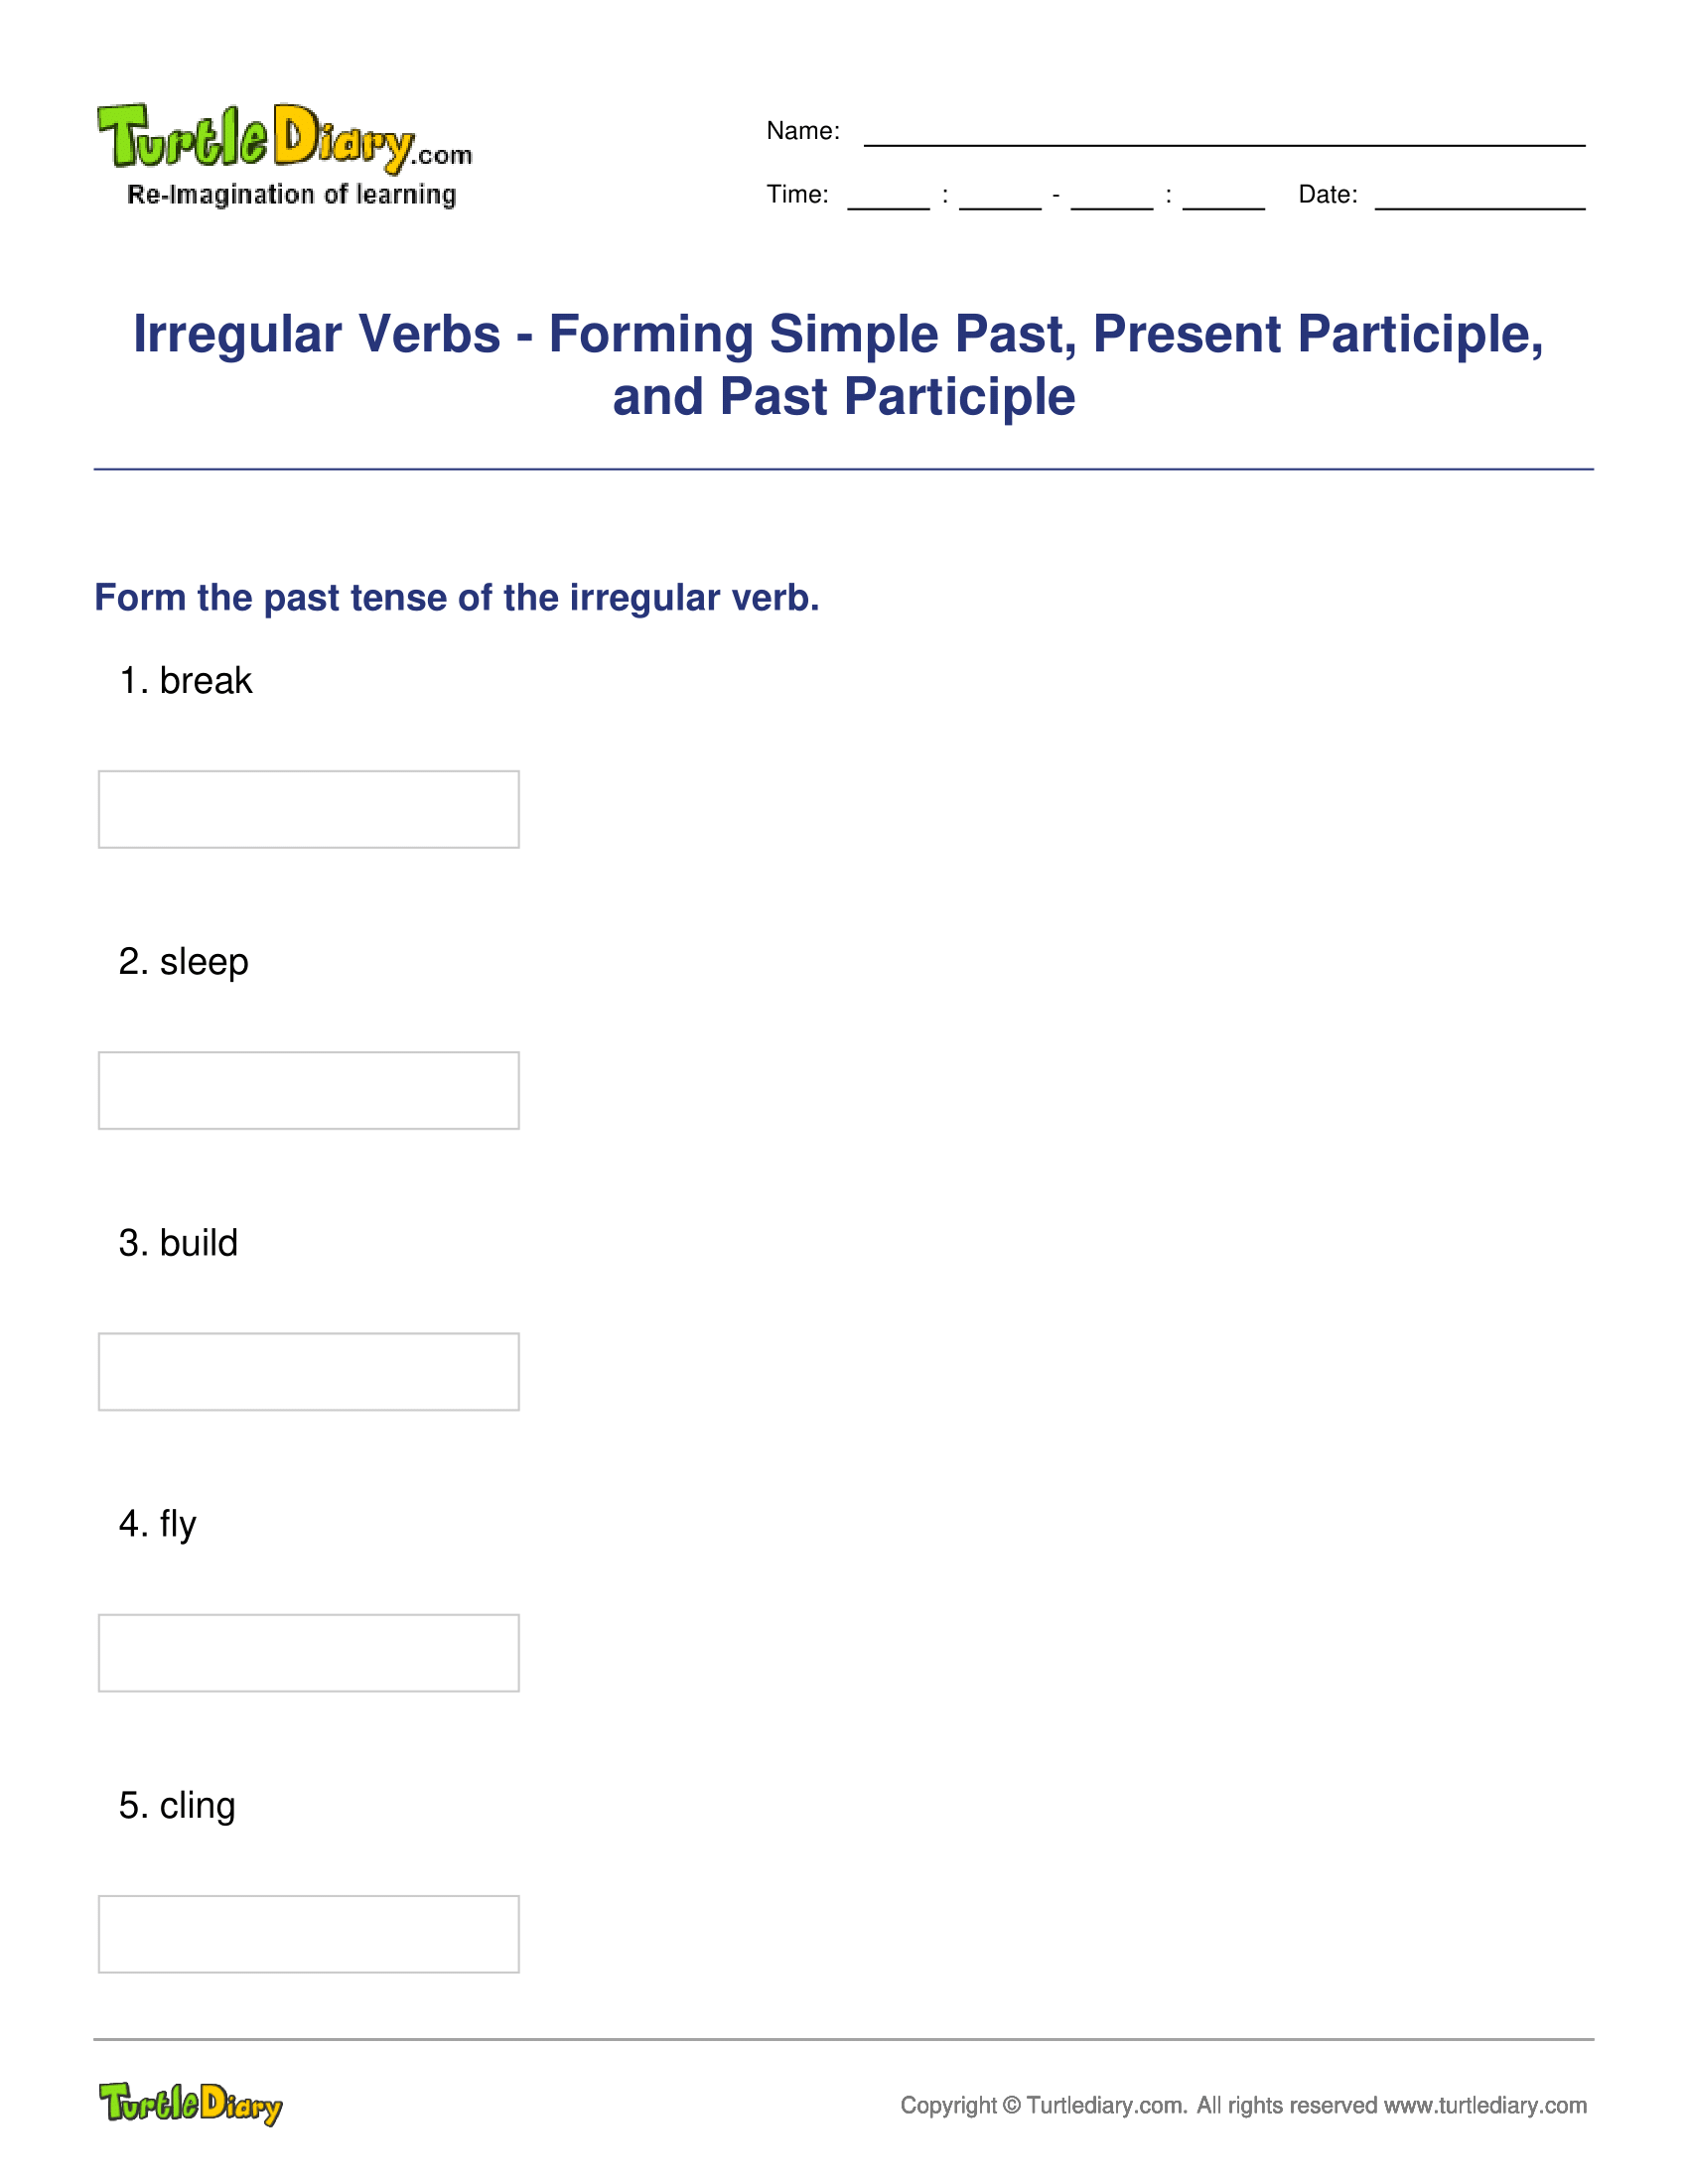 Irregular Verbs - Forming Simple Past, Present Participle, and Past Participle